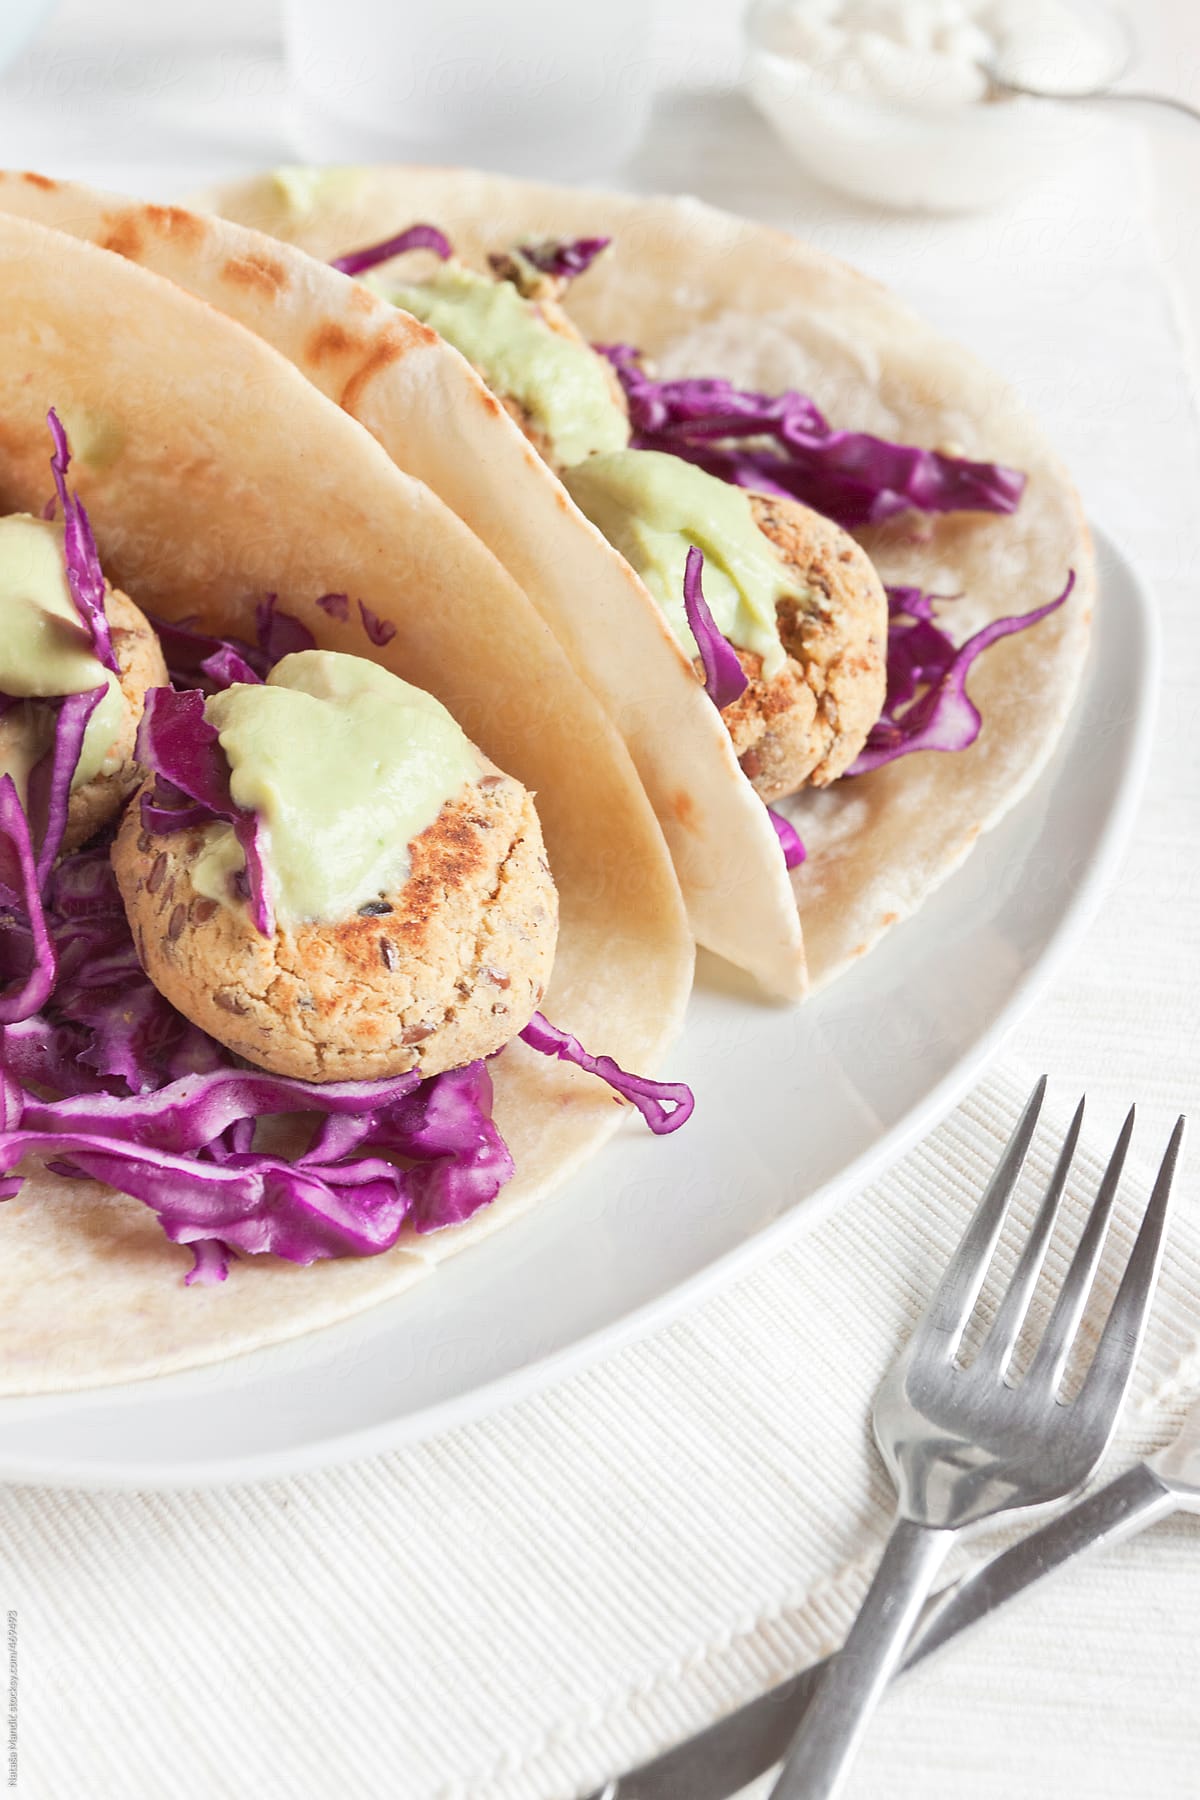 Homemade tacos with cabbage slaw, chickpea patties and sauce